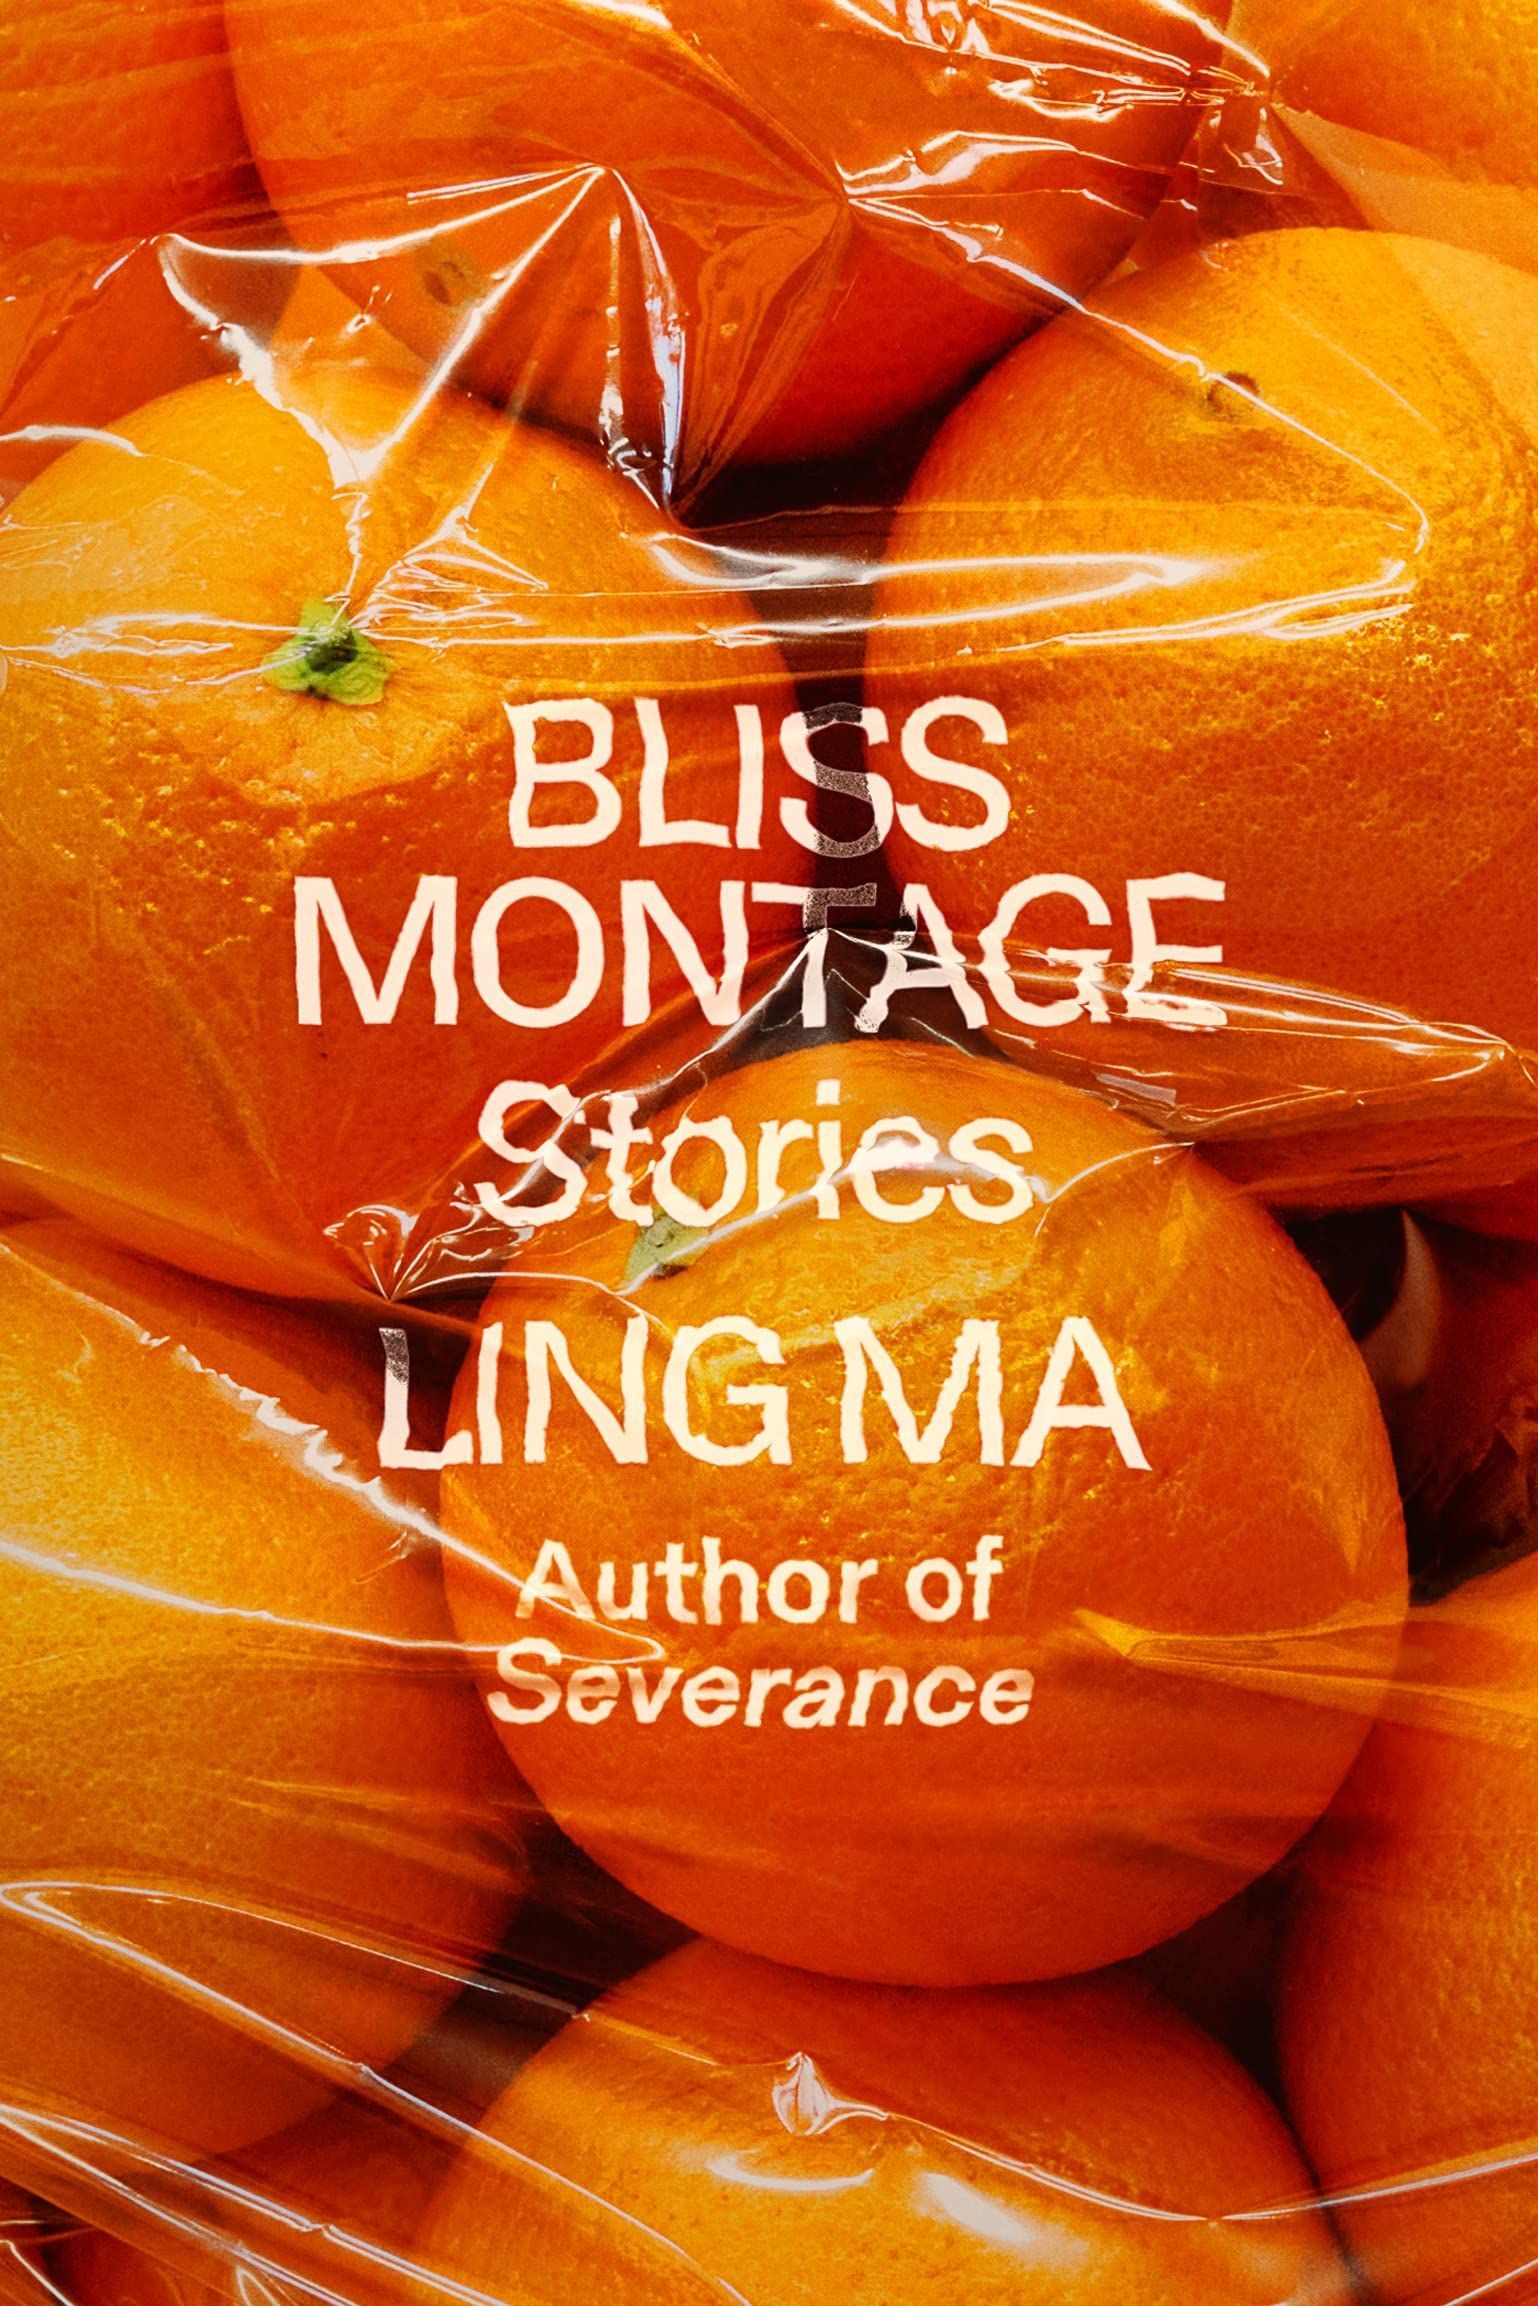 Startling Glimmers of Truth: On Ling Ma’s “Bliss Montage”